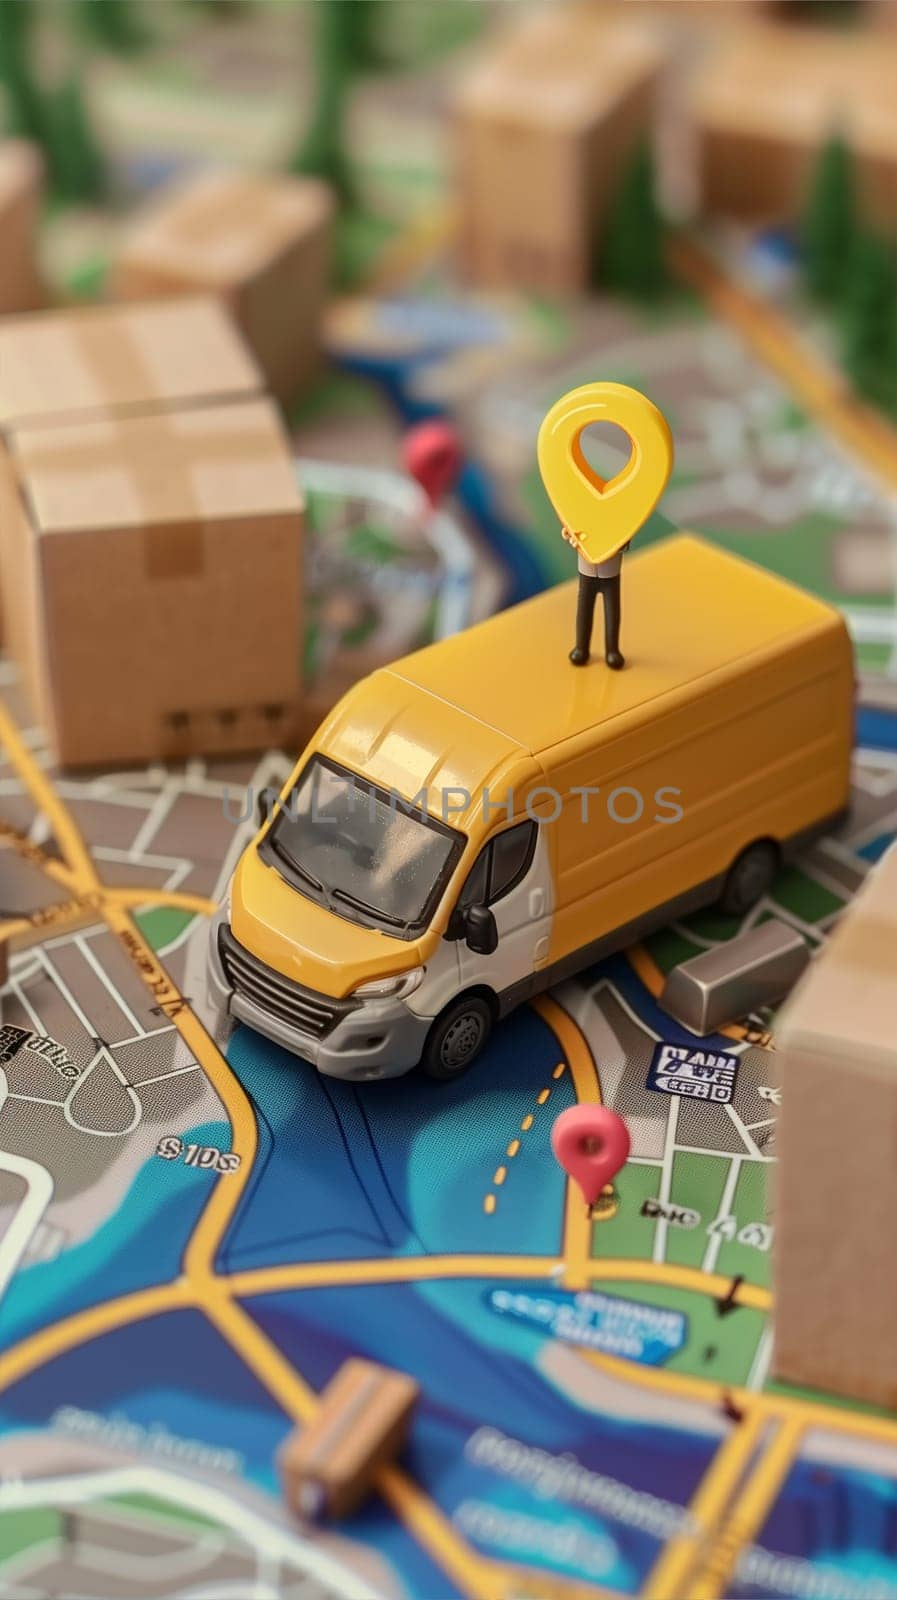 Miniature Delivery Van on a Printed City Map Indicating Route Selection Process by Sd28DimoN_1976